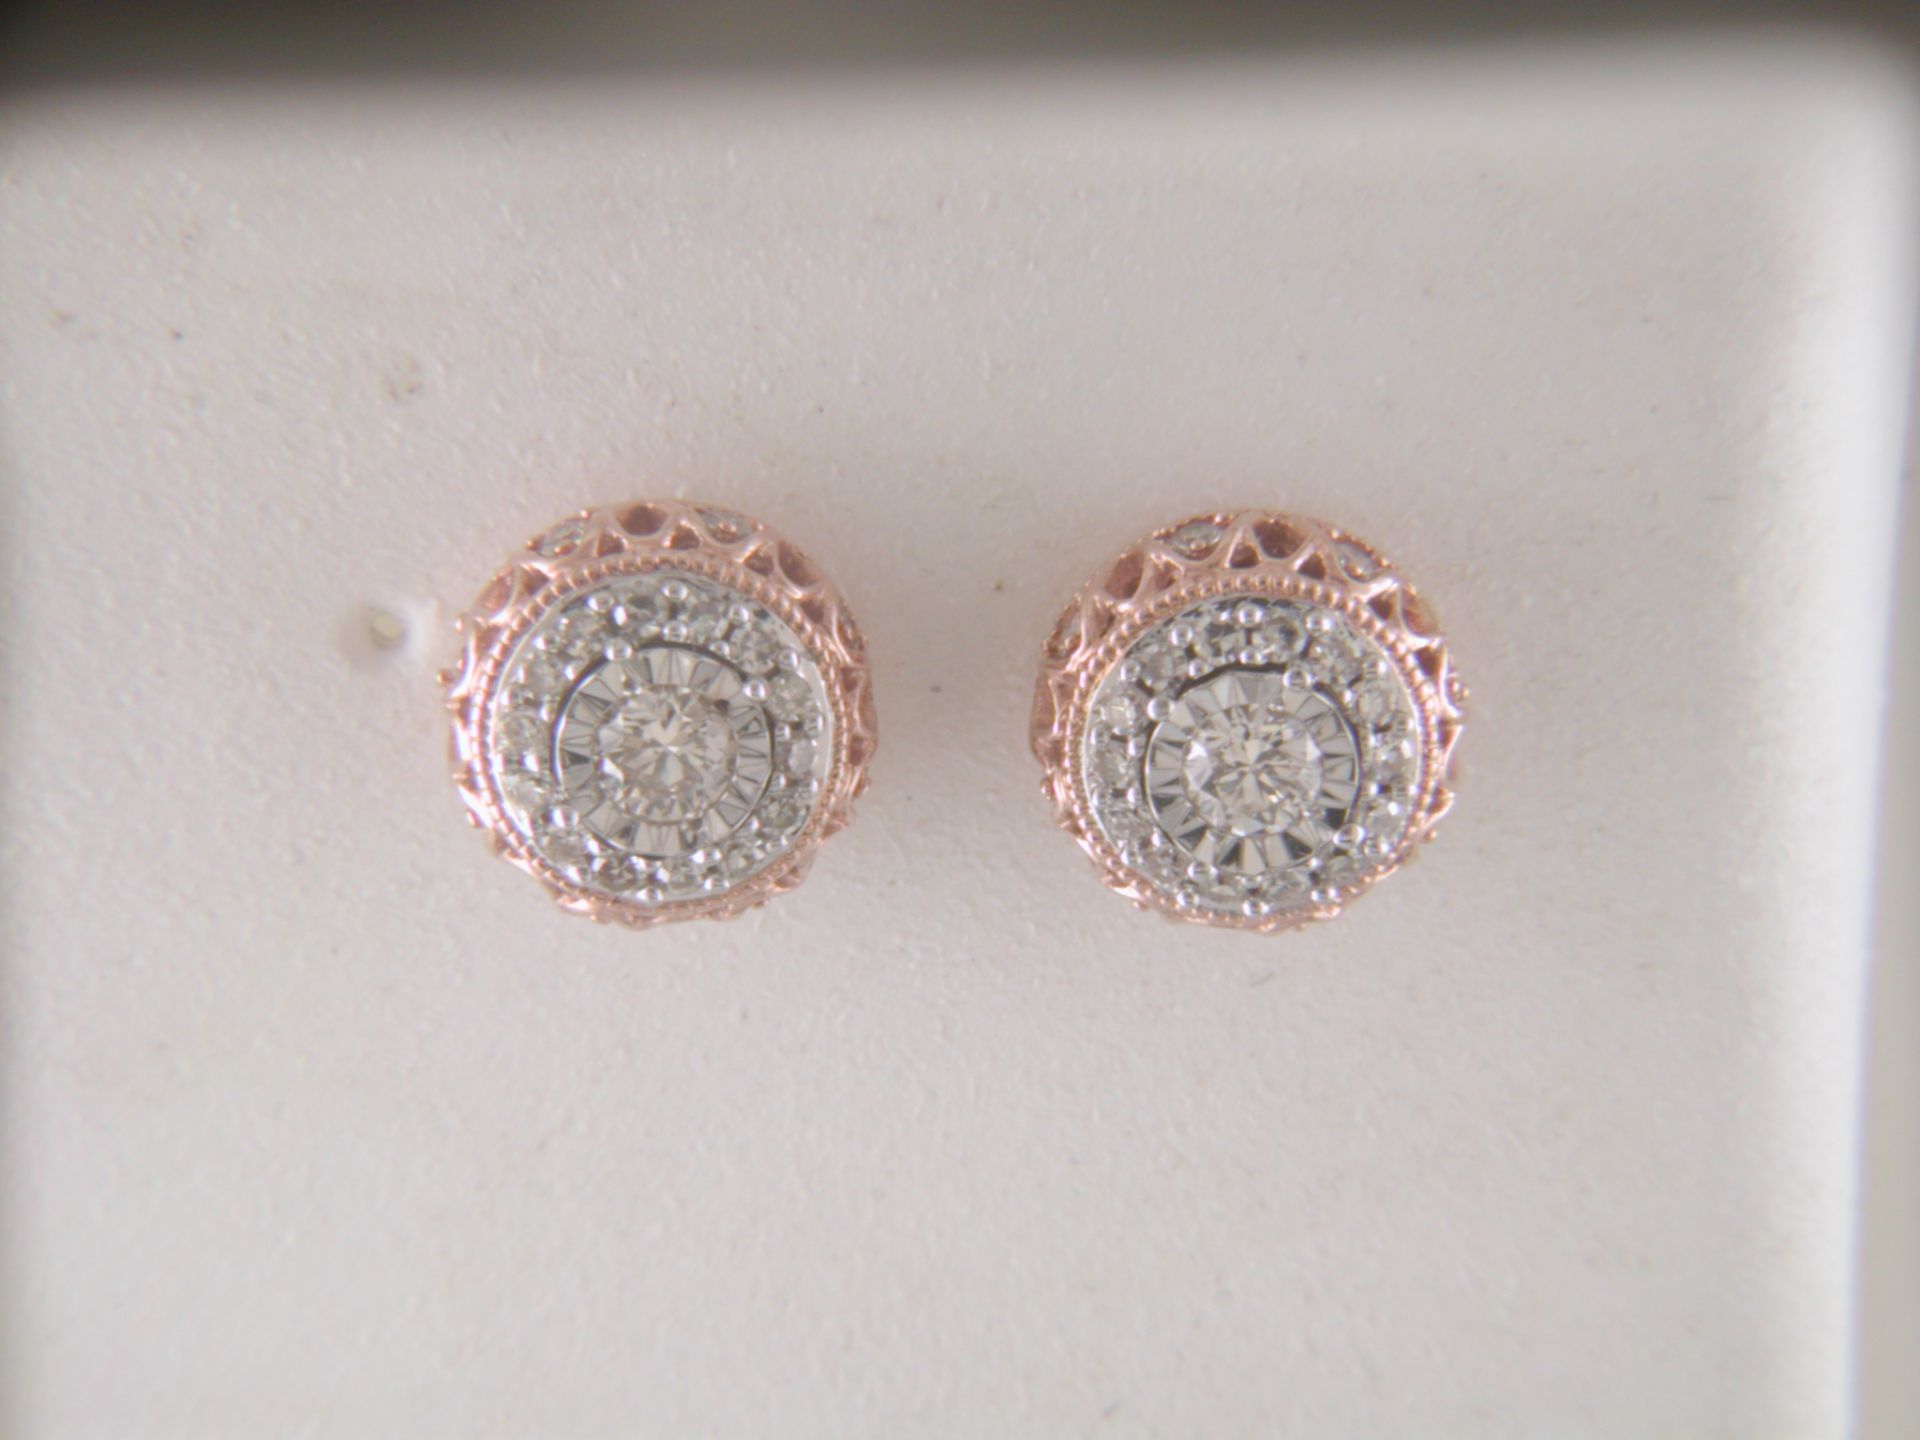 9ct Rose Gold Diamond Halo Earrings 0.45 Carats - Valued By GIE £4,300.00 - Vibrant 9ct rose gold